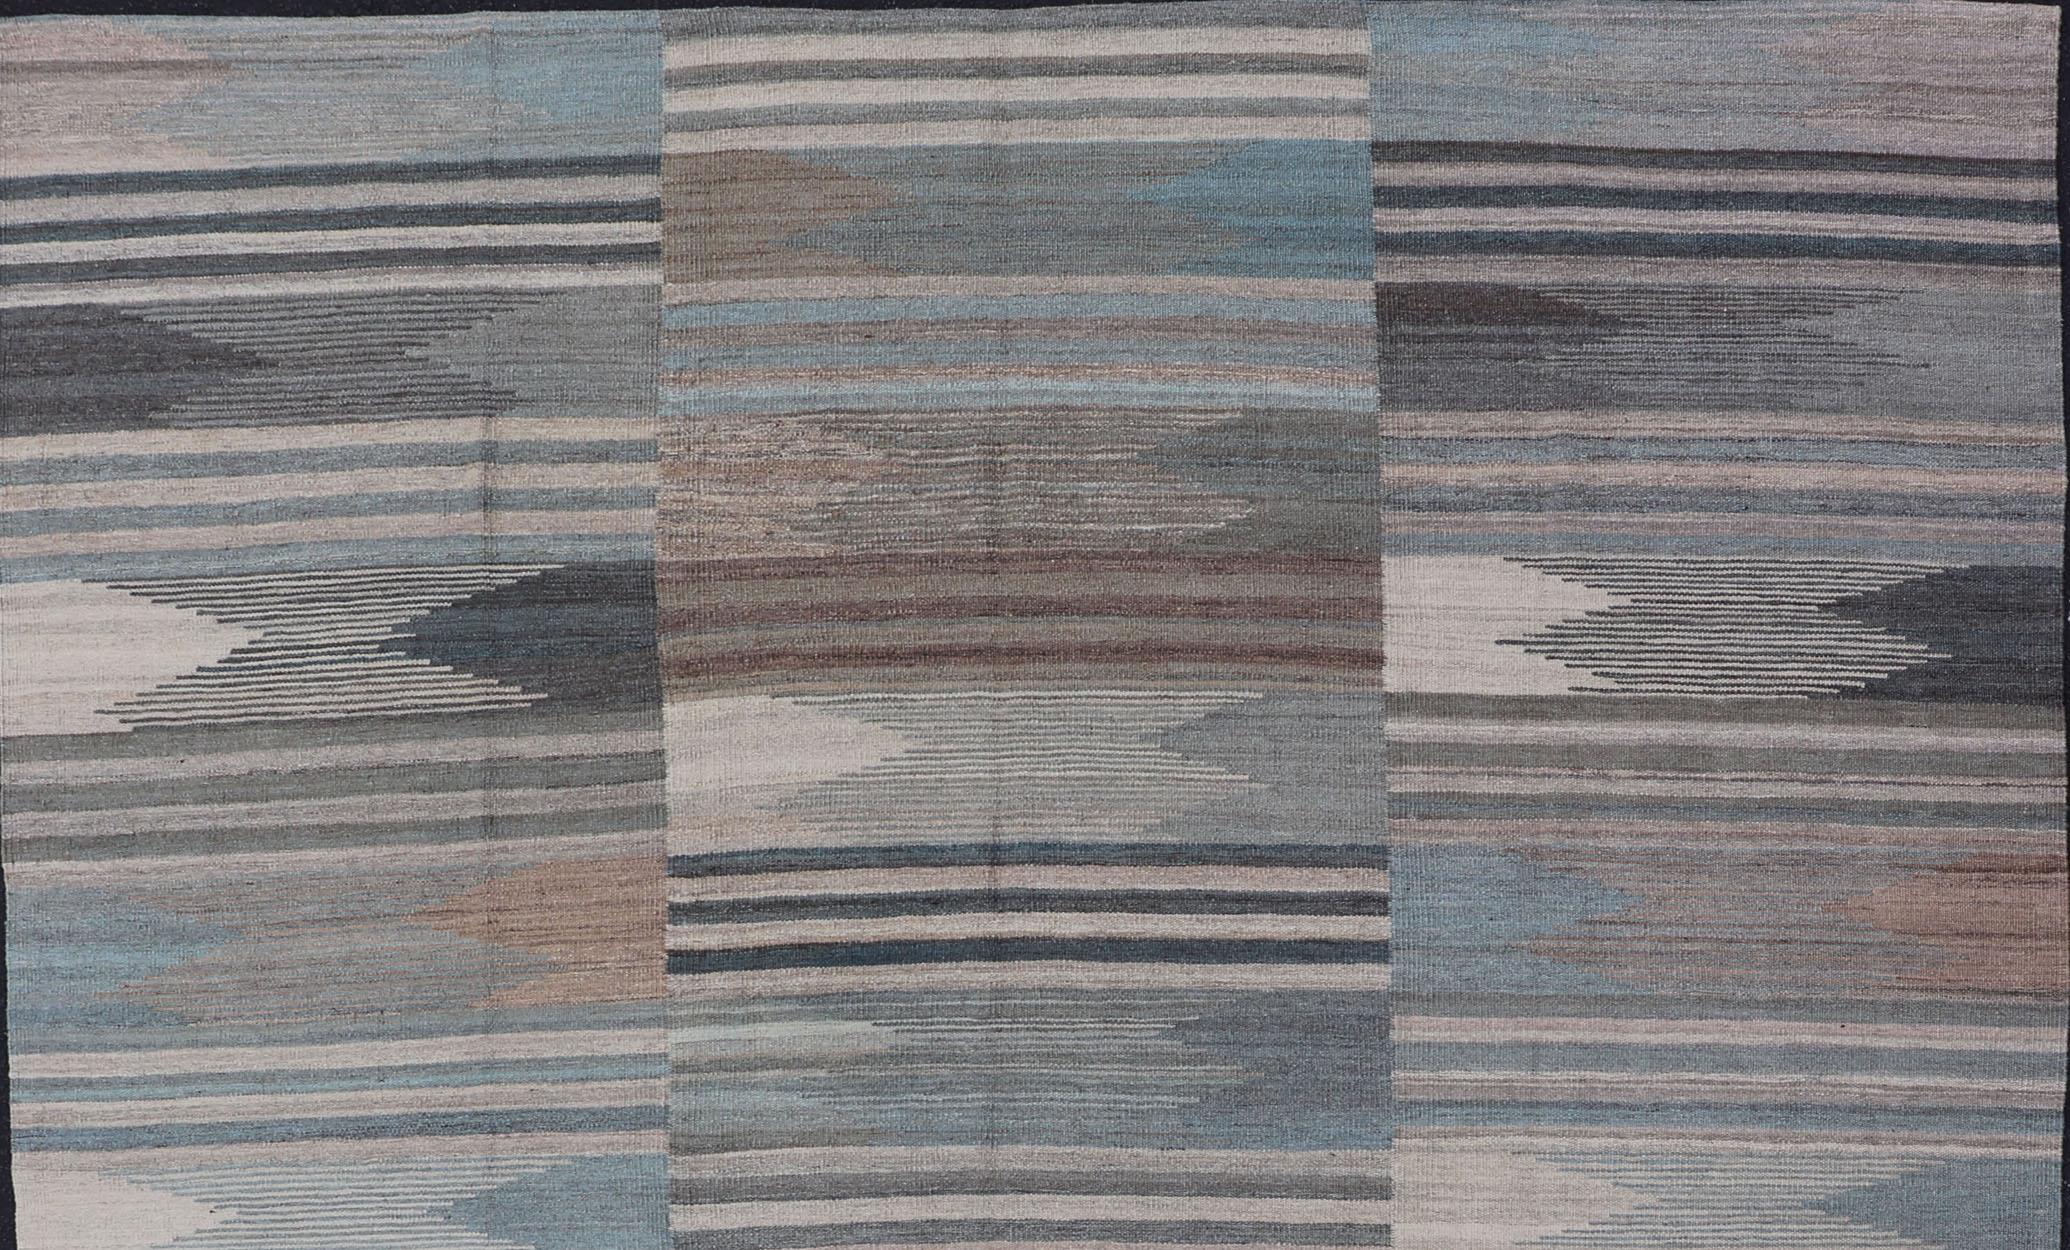 blue, gray, brown checkered Kilim Modern rug with Kilim, Keivan Woven Arts / rug AFG-203, country of origin / type: Afghanistan / Kilim, condition: new

This brand new rug features a modern checkered design and a flat-woven composition. The color